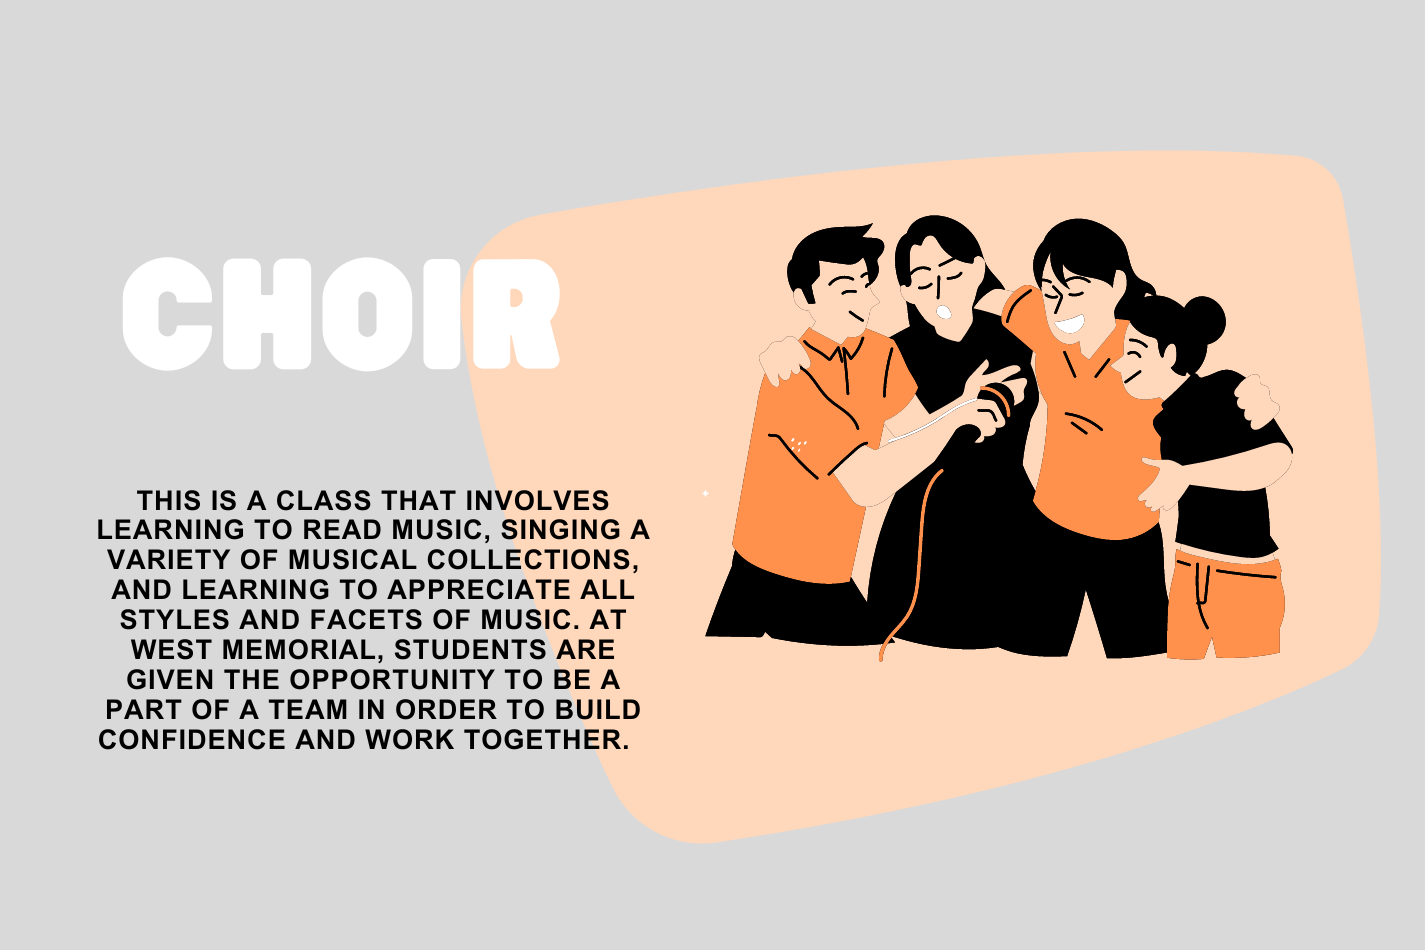 Choir is a class involving learning to read music, sing and appreciate different musical styles. 